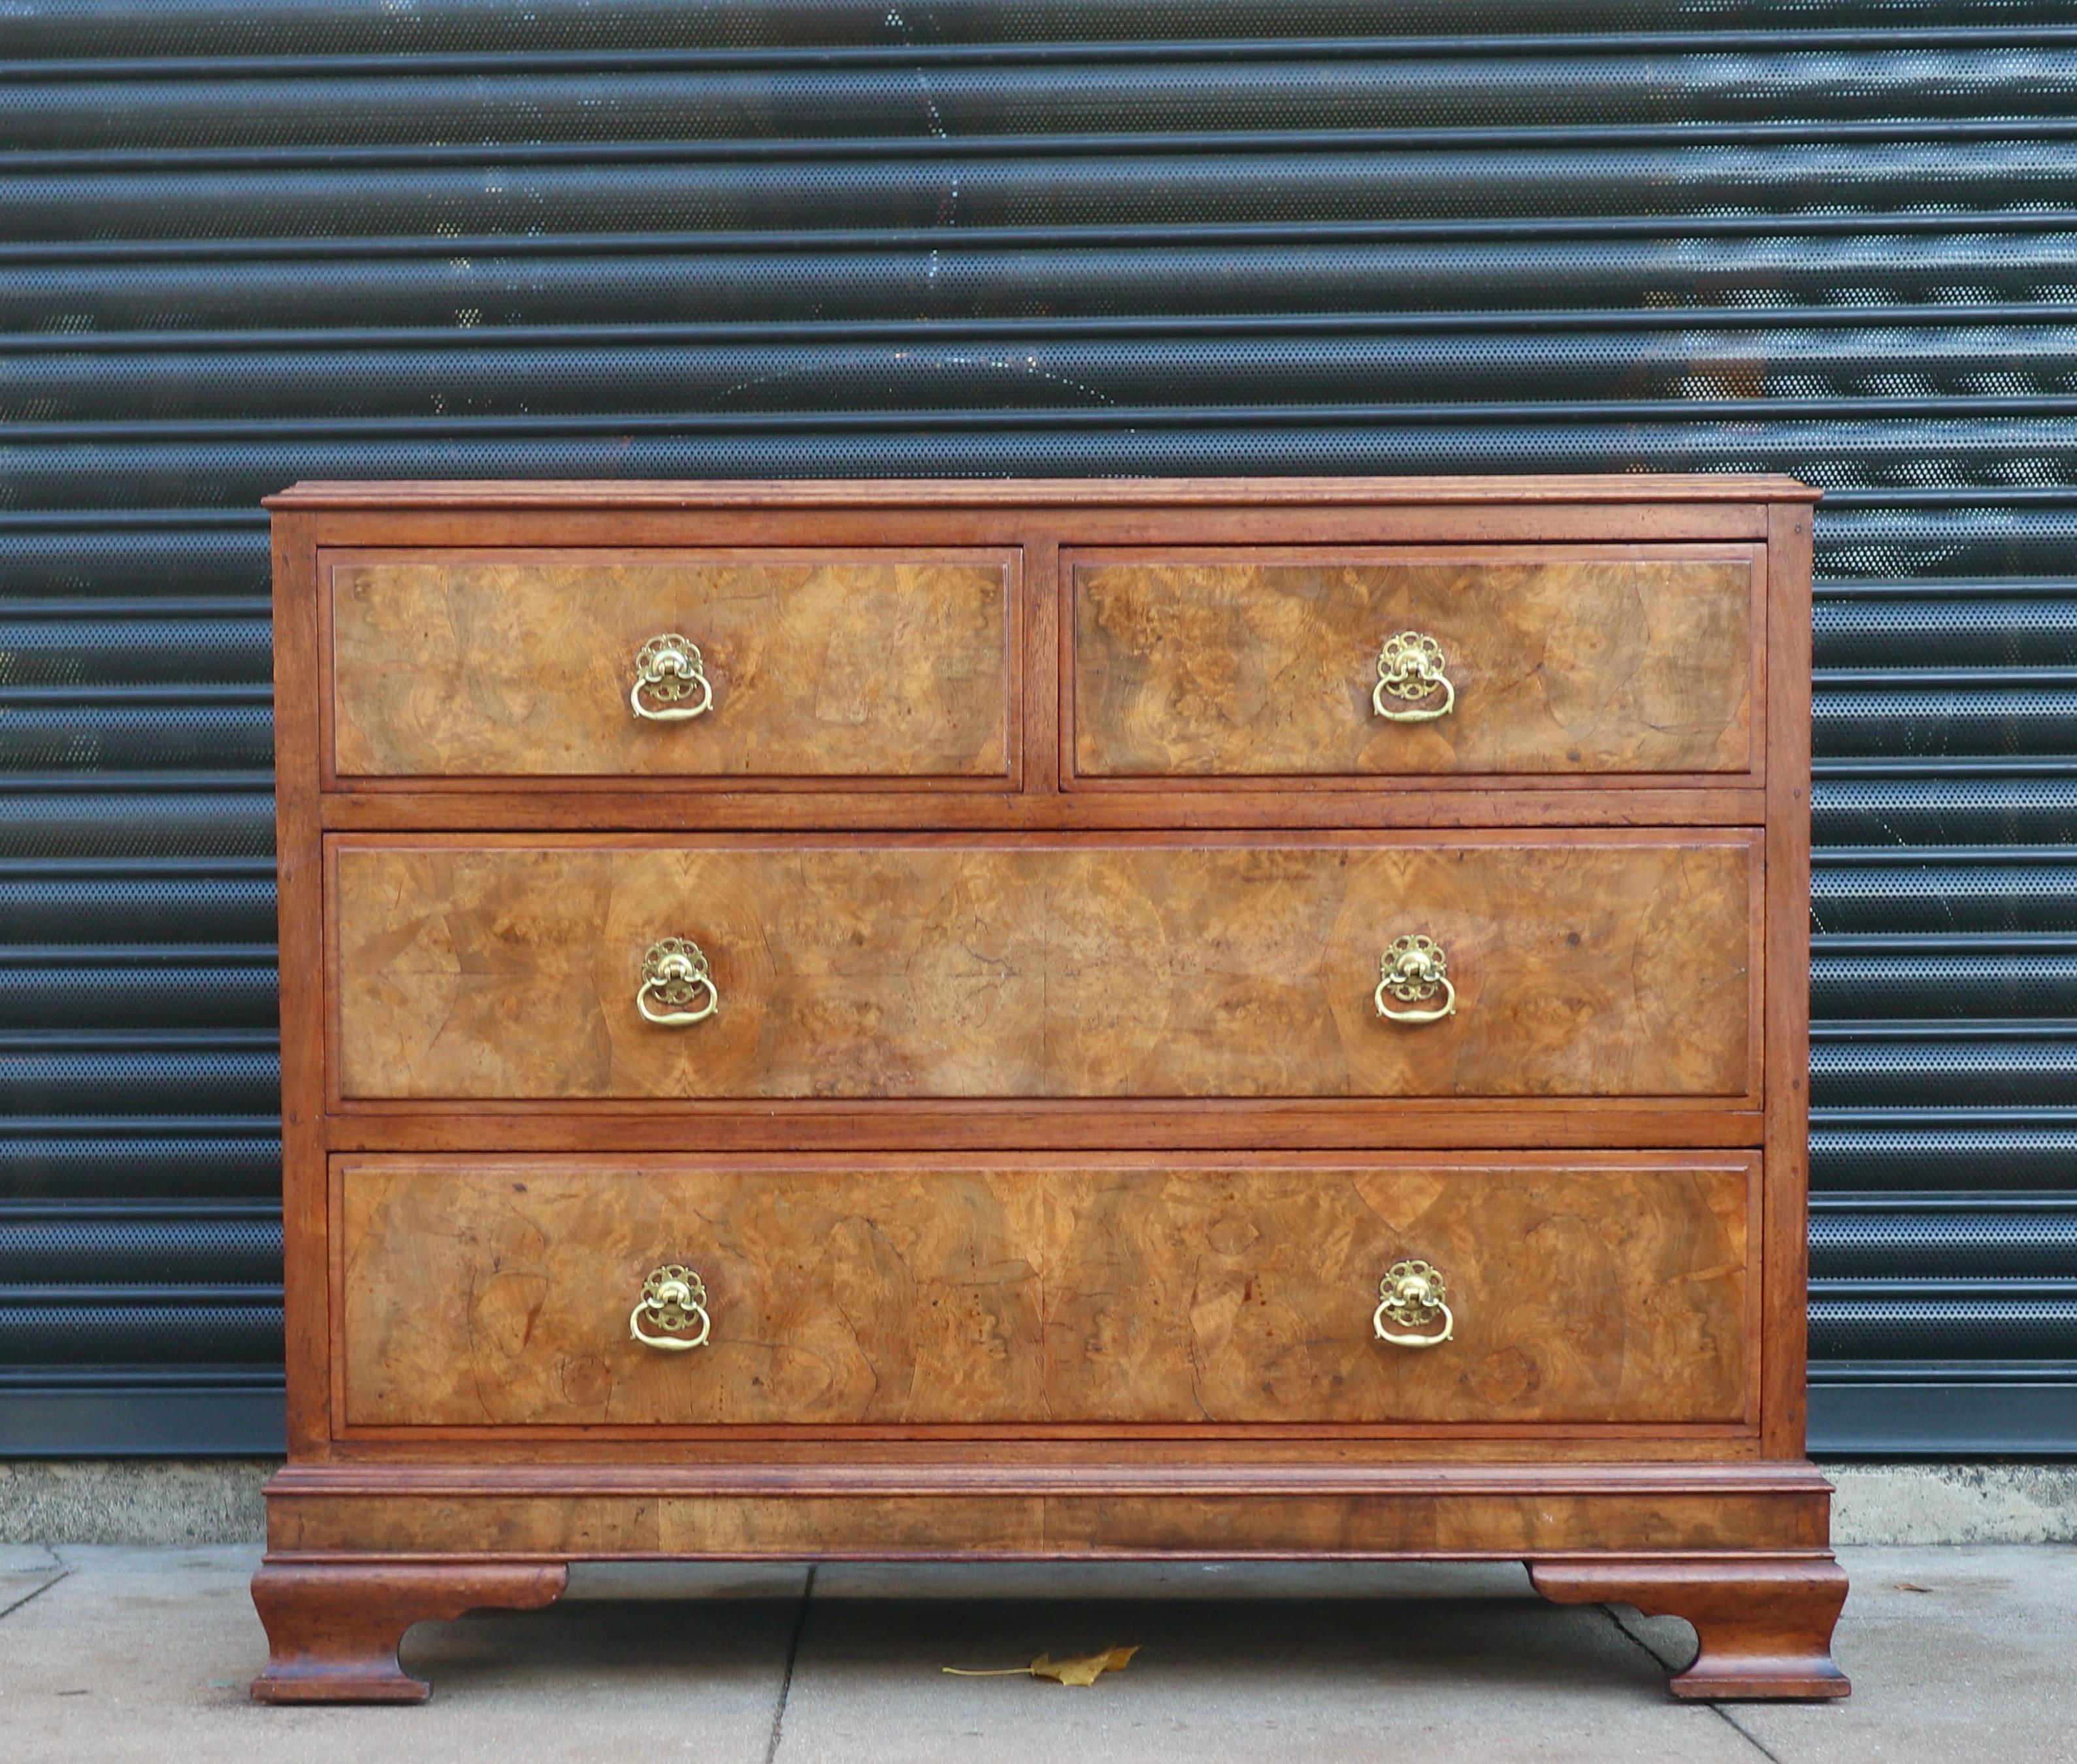 A stylish and beautiful English 1920s four drawer chest of drawers with a solid mahogany carcass, burr walnut fronts and metal handles.
Antique Queen Anne Revival Burr Walnut Chest Of Drawers Signed And Dated 1926.
The top has some minor water